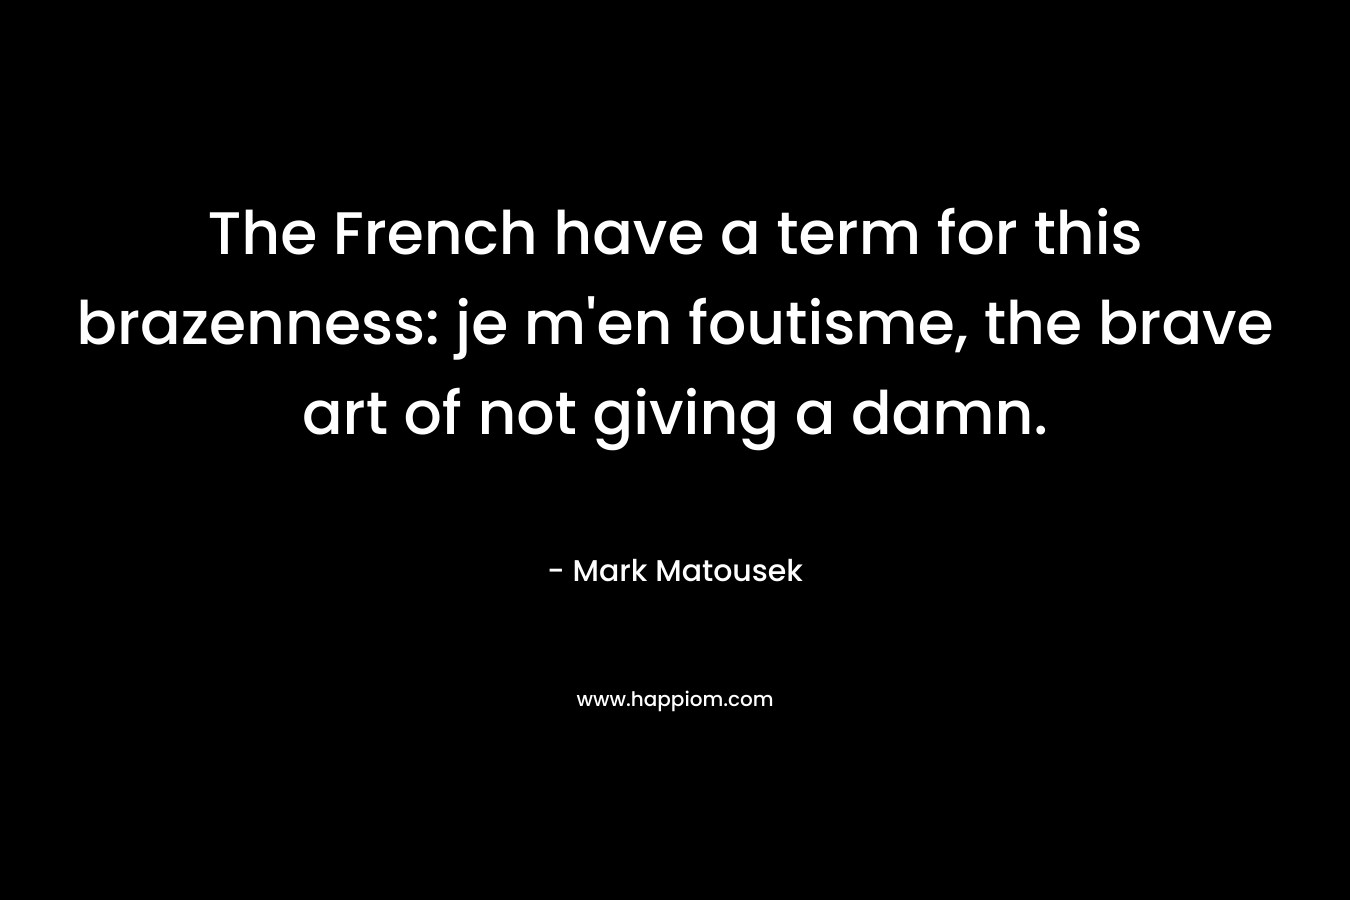 The French have a term for this brazenness: je m’en foutisme, the brave art of not giving a damn. – Mark Matousek